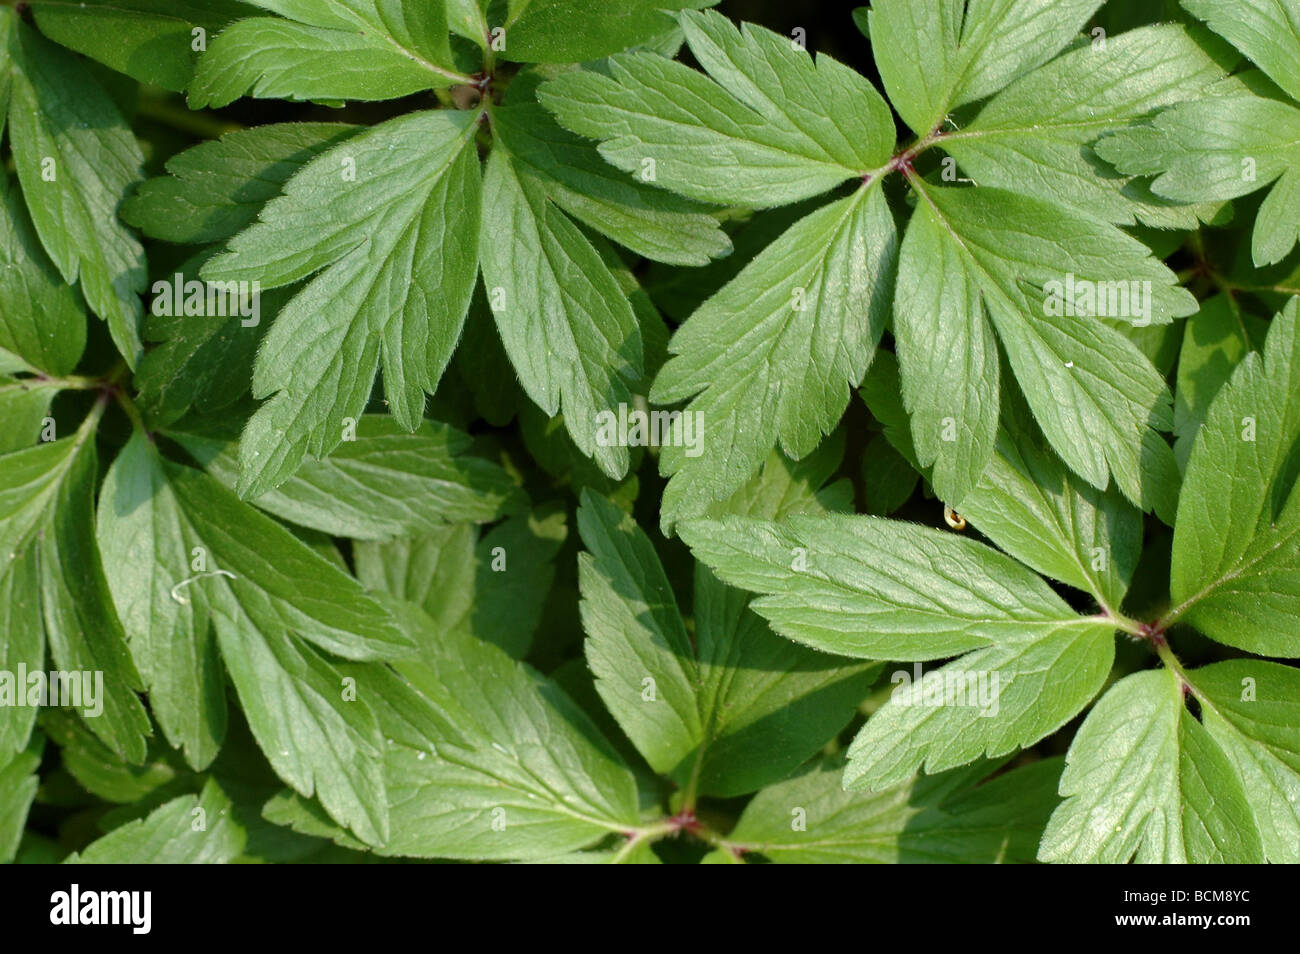 Green floral background of anemone leaves Stock Photo